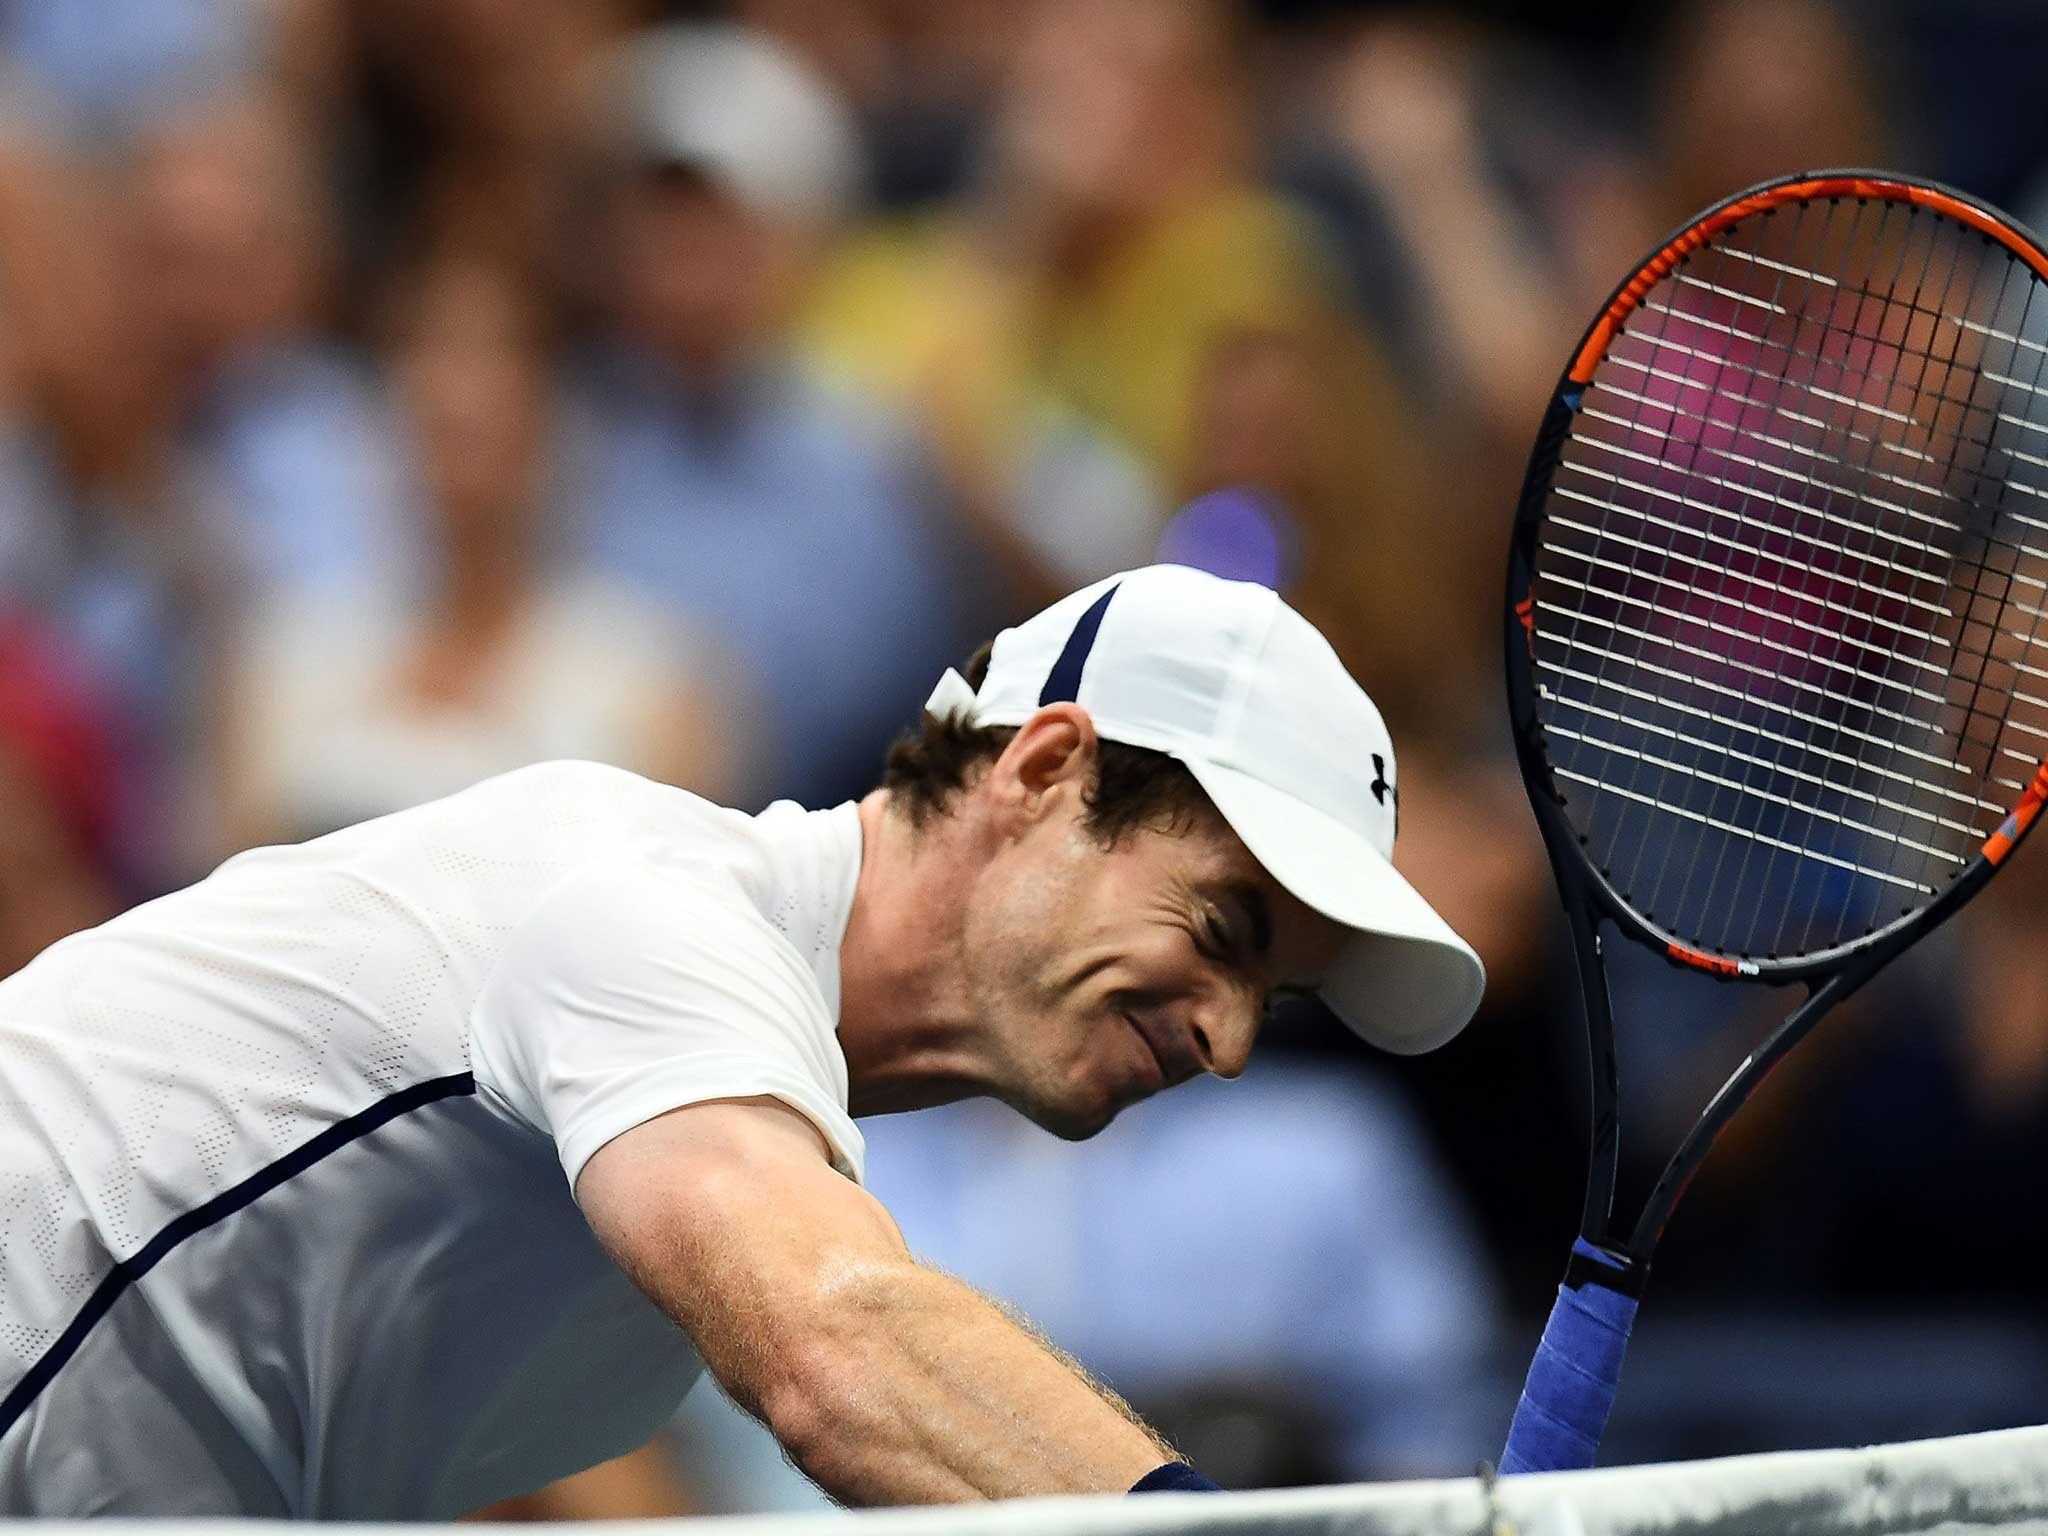 Murray's frustration boiled over on occasion